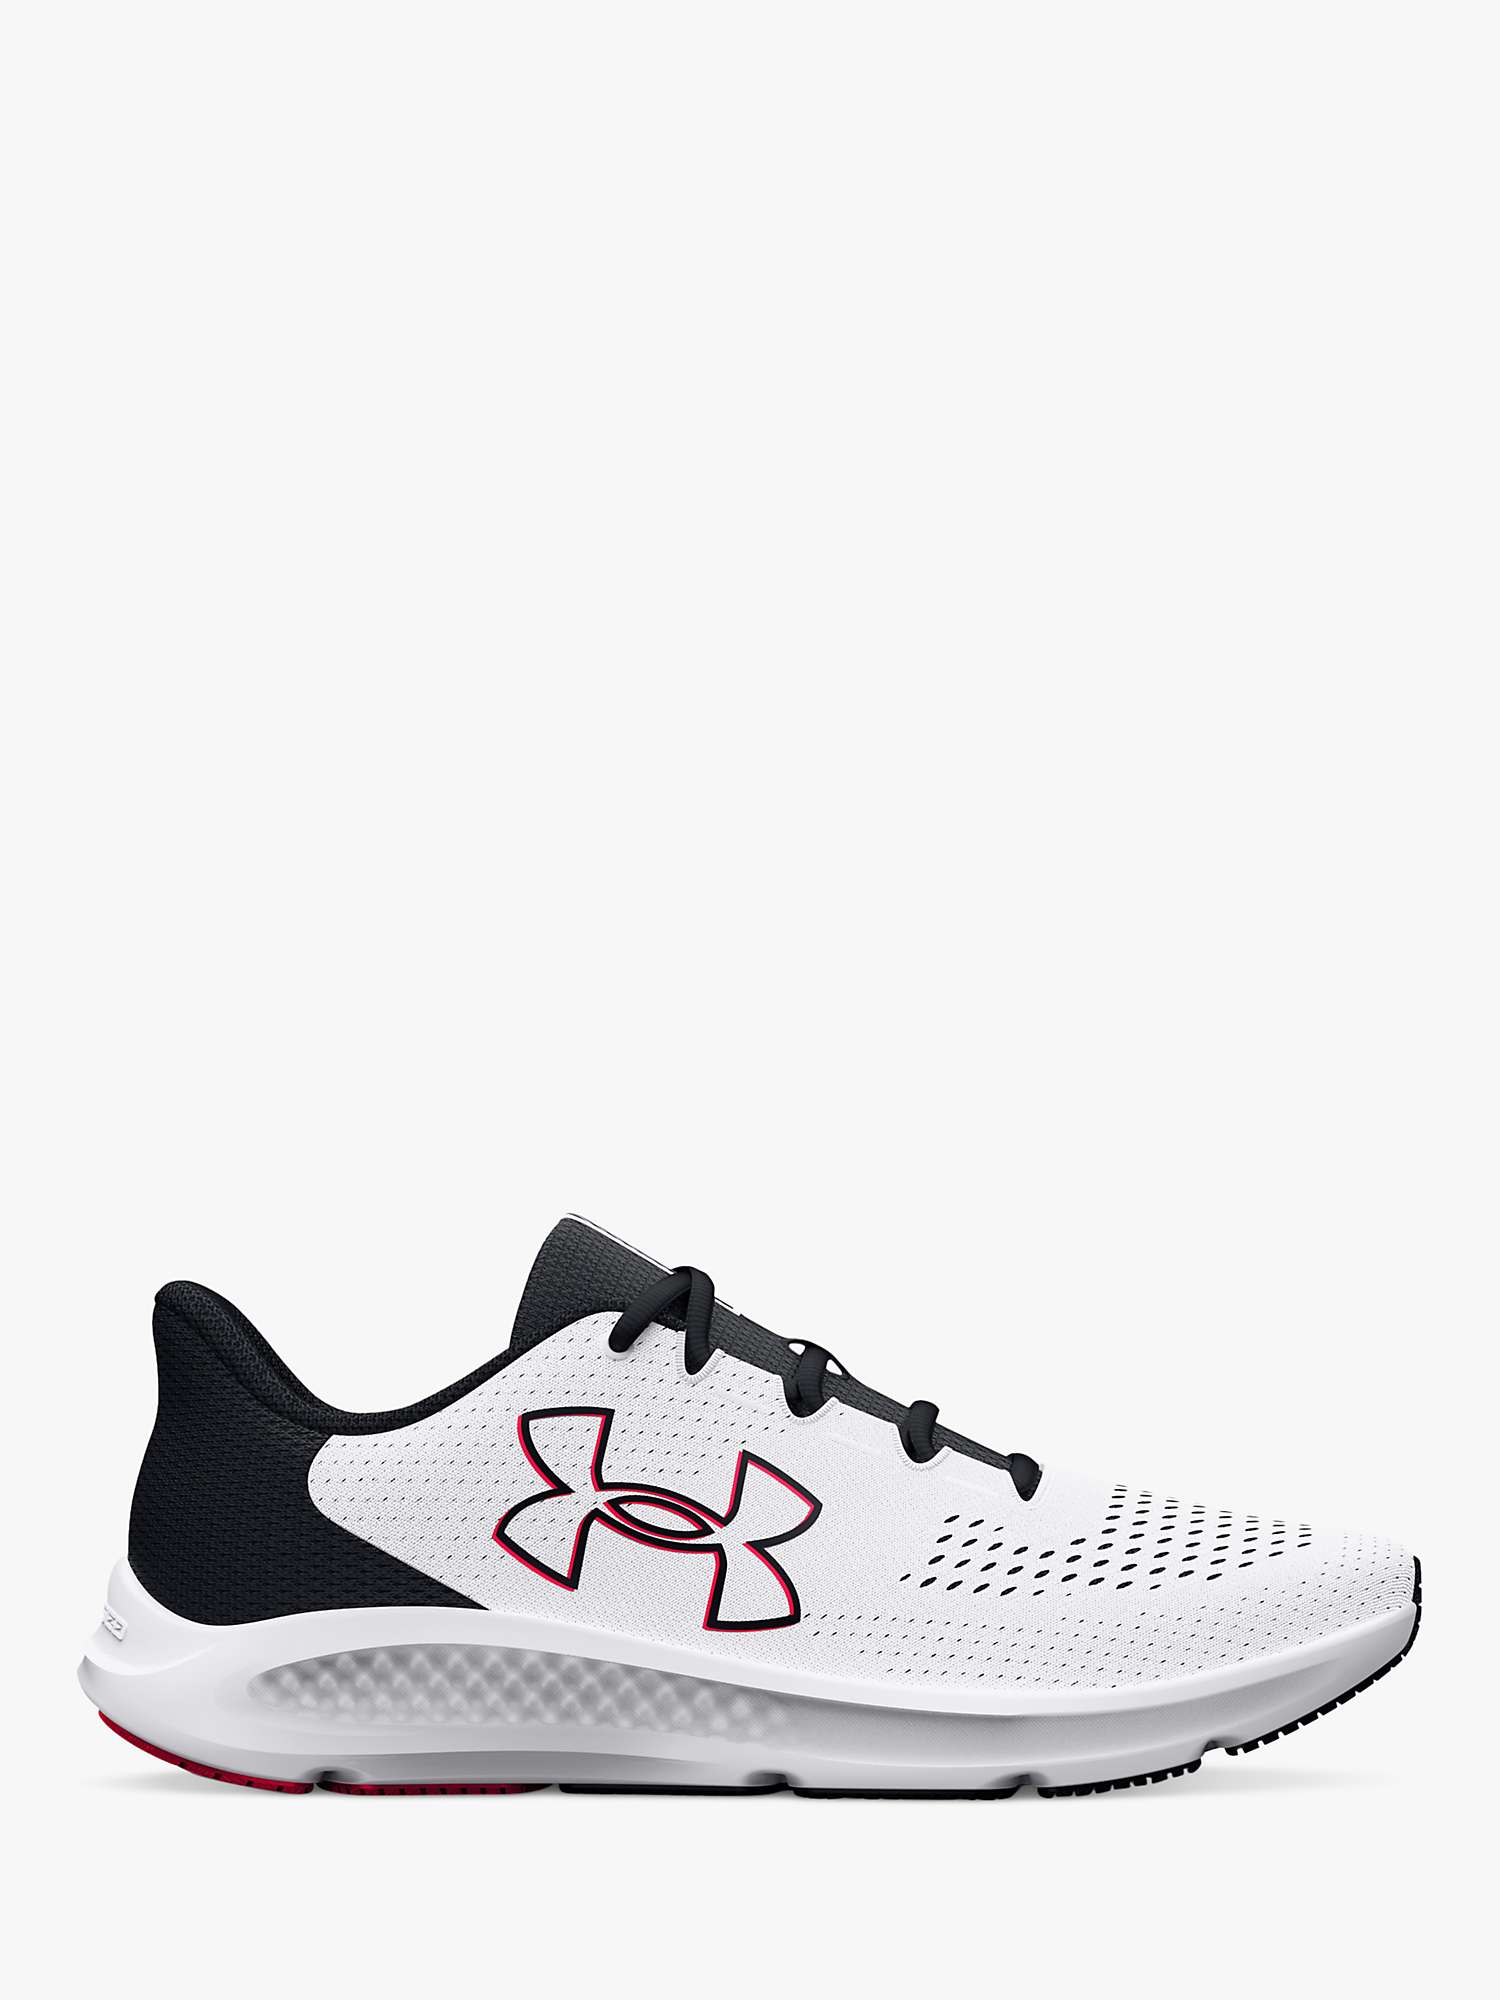 Under Armour Charged Pursuit 3 Men's Running Shoes, White/Black/Red at ...